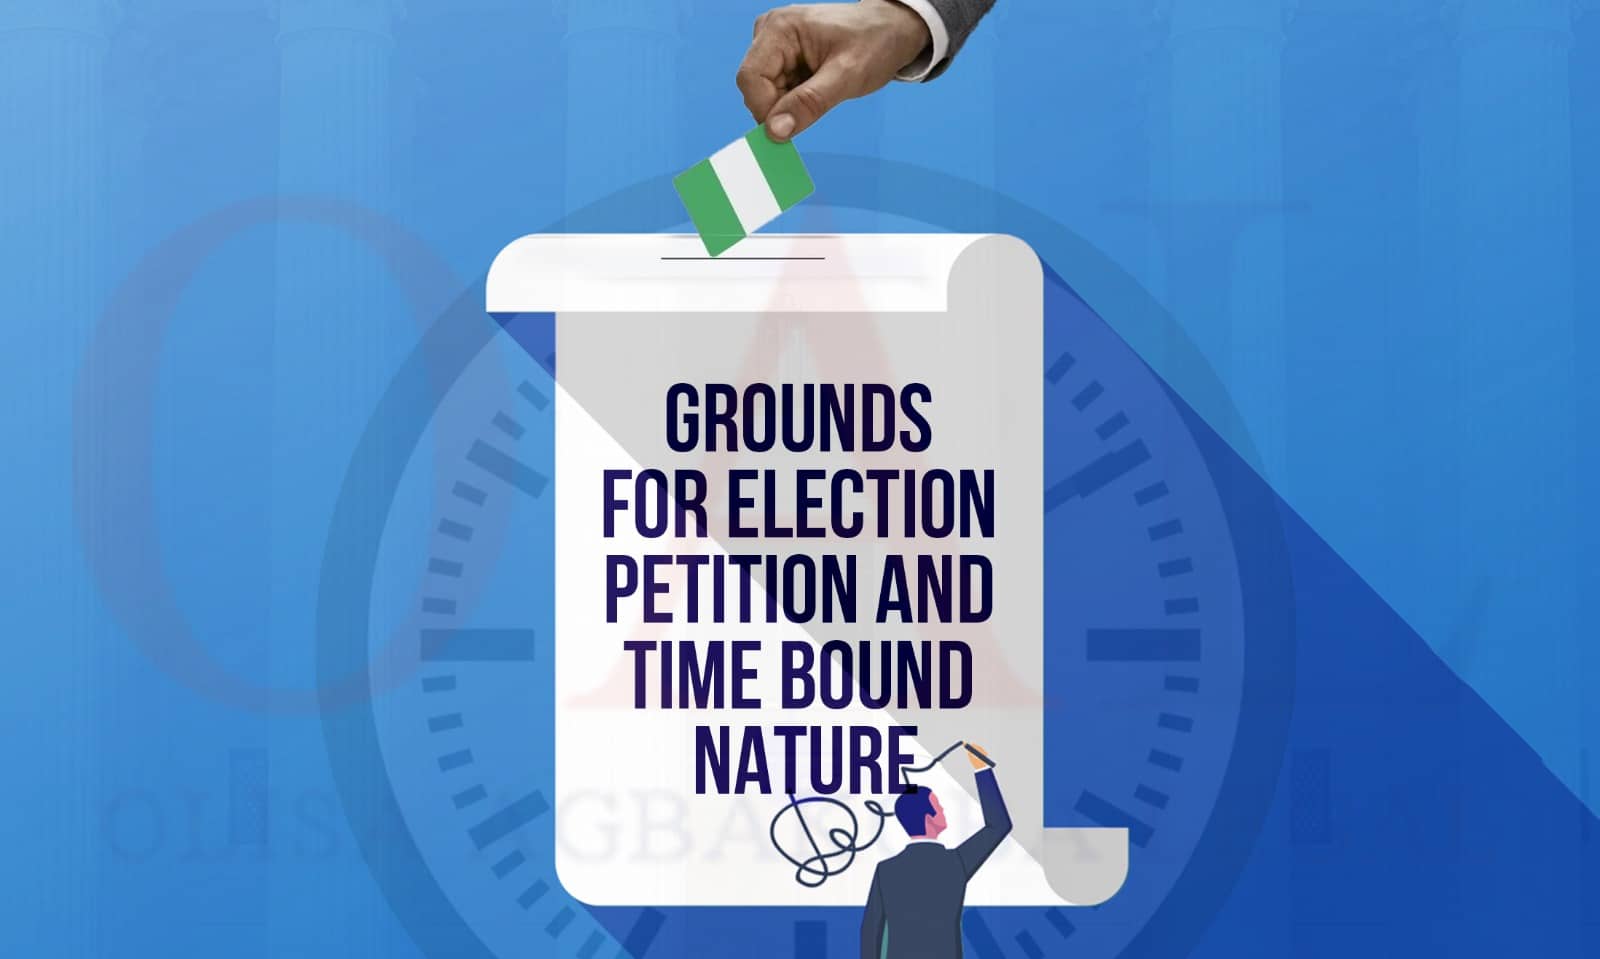 Grounds For Election Petition And Time Bound Nature.